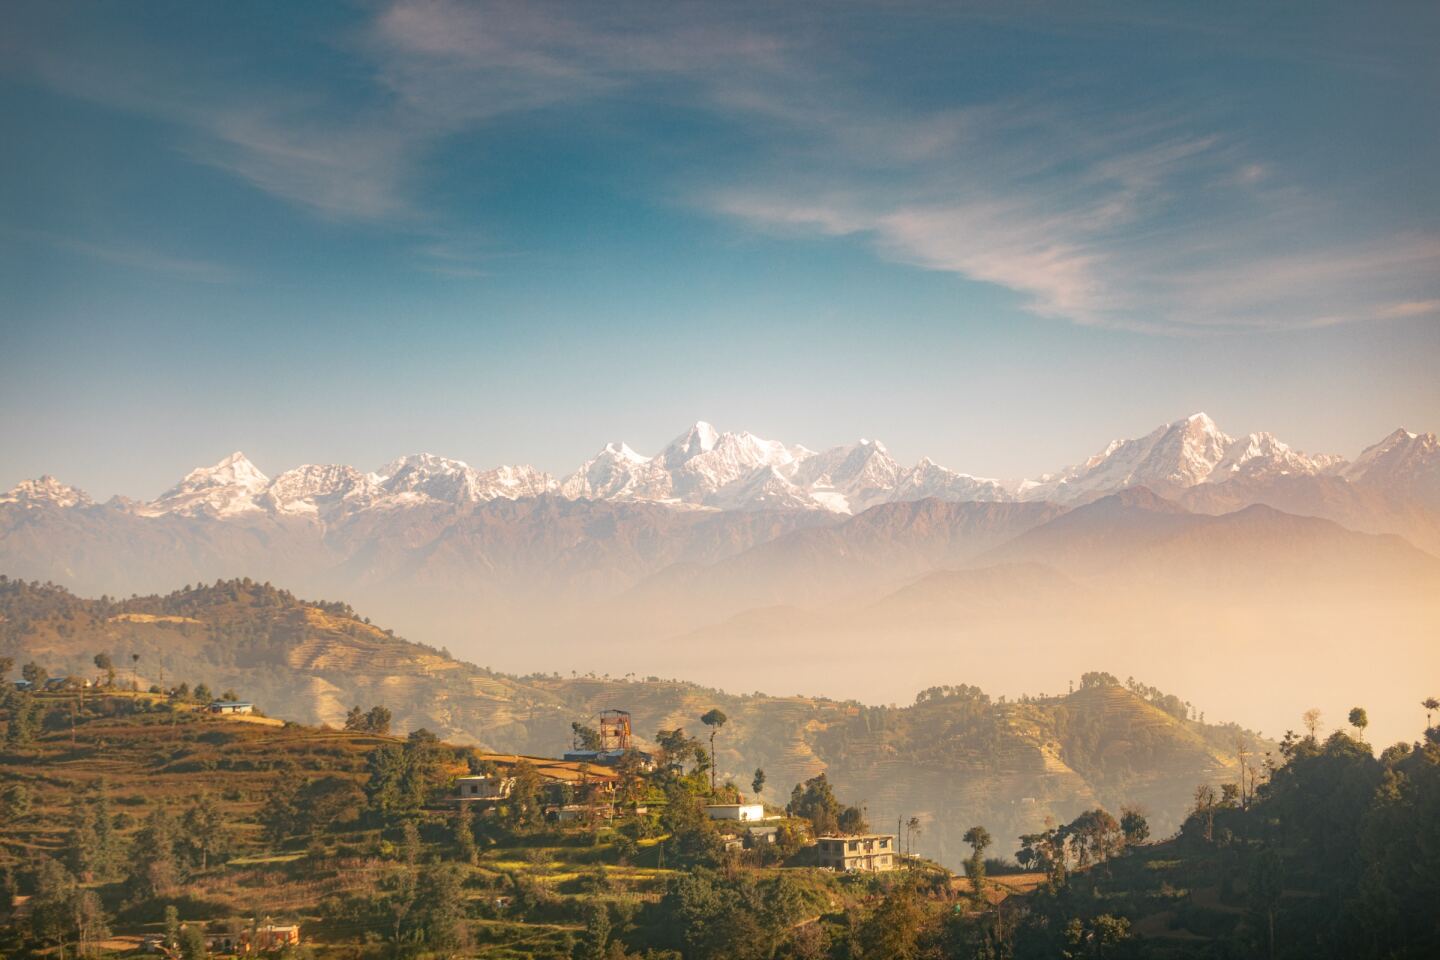 <h2>8. Nepal</h2> <p>Even if you’ve seen the lofty peaks of the <a class="Link" href="https://www.afar.com/travel-guides/swiss-austrian-and-german-alps/guide">Swiss Alps</a> or the jungle-covered slopes of the Andes, nothing prepares you for the mountains of Nepal. As home to the tallest mountains in the world, Nepal means trekking in the Himalayas is one of the best things to do. Muscle up the popular Annapurna Sanctuary, Everest Base Camp, and the Langtang Valley routes and admire the spiny ridges of gargantuan rock formations.</p> <p>But there’s more to Nepal beyond the heaven-high peaks of Everest. The country rewards in the spectacular temples and architecture of Kathmandu, delicious street food (don’t leave without trying a momo dumpling), and sacred sites like the Royal City of Patan.</p> <h3>Where to stay</h3> <ul>   <li>Book now: <a class="Link" href="https://www.pavilionshotels.com/himalayas/" rel="noopener">The Pavilions</a></li>  </ul> <p>Book a stay at <a class="Link" href="https://www.pavilionshotels.com/himalayas/" rel="noopener">the Pavilions</a>, one of the most charming boutique hotels in Nepal. Tucked in a green-blanketed valley with epic views of the Himalayas, this ecofriendly resort has 14 villas powered by renewable energy.</p>